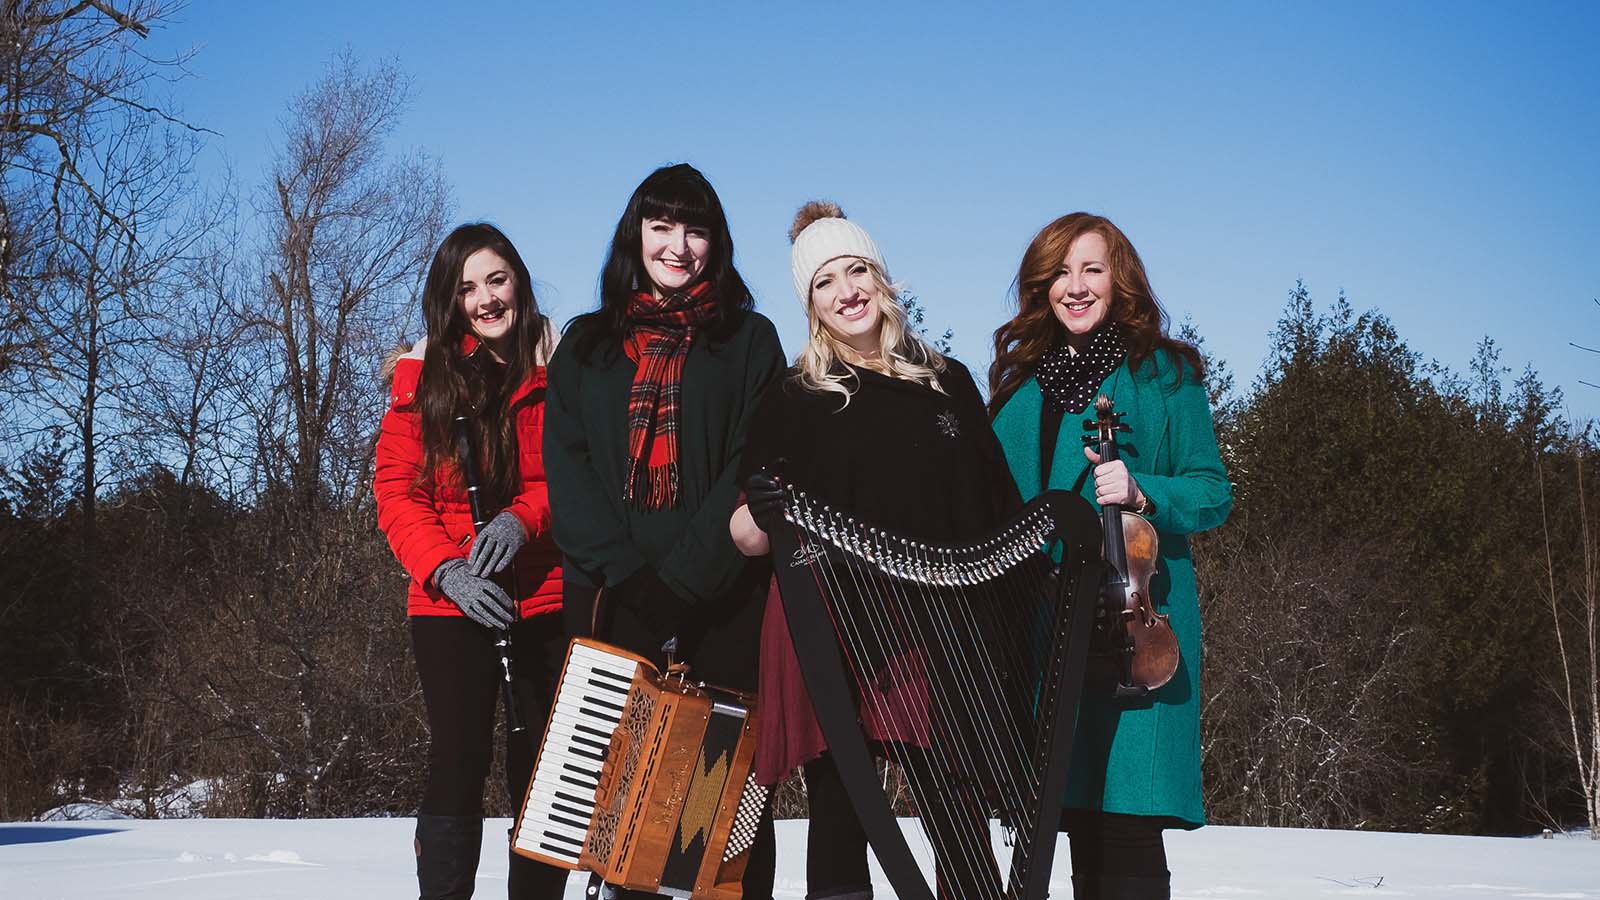 Four women in winter clothing standing in the snow with instruments: a harp, a violin, an oboe and an accordion